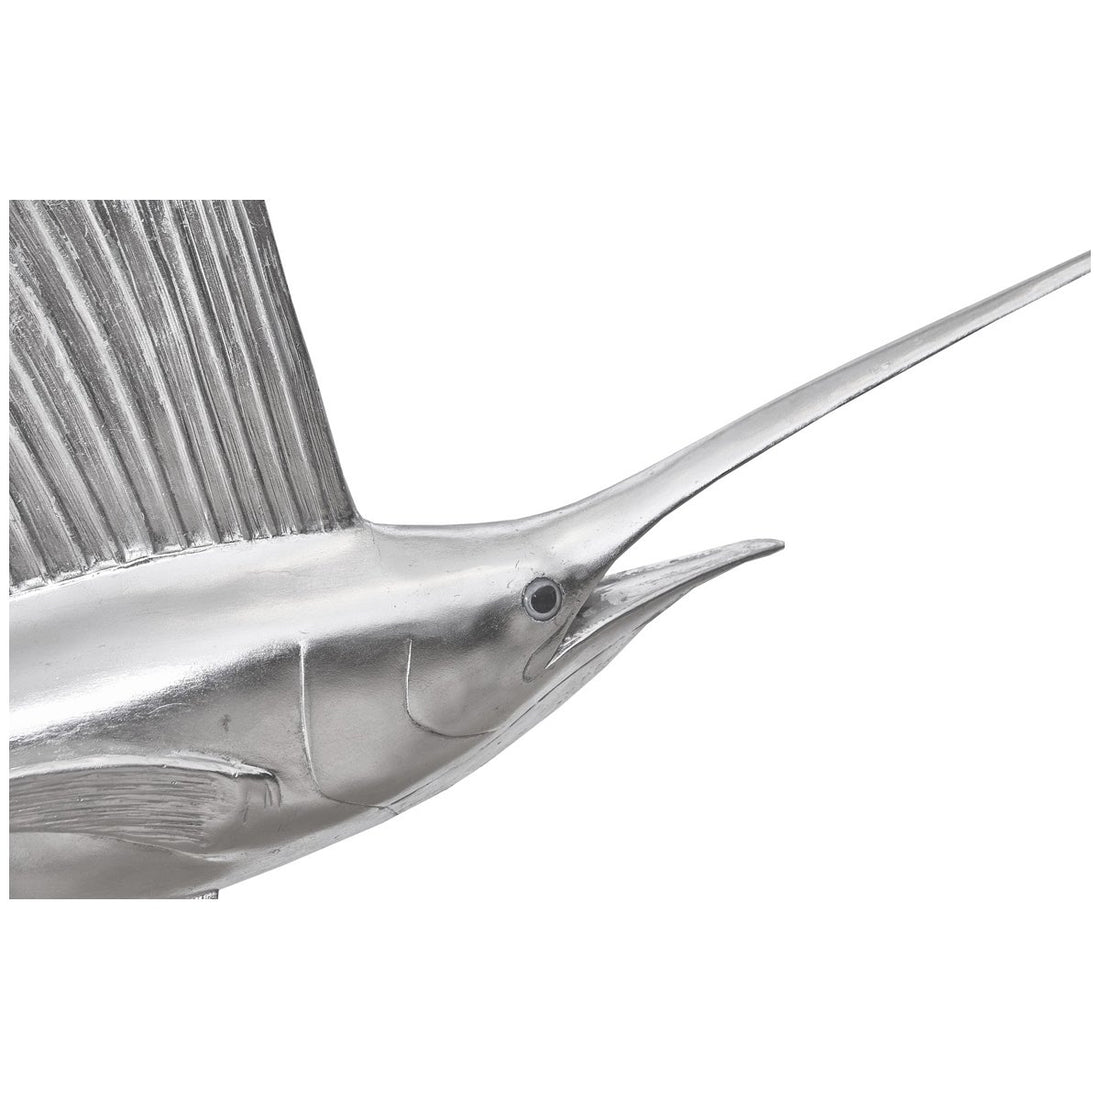 Phillips Collection Sail Fish Wall Sculpture